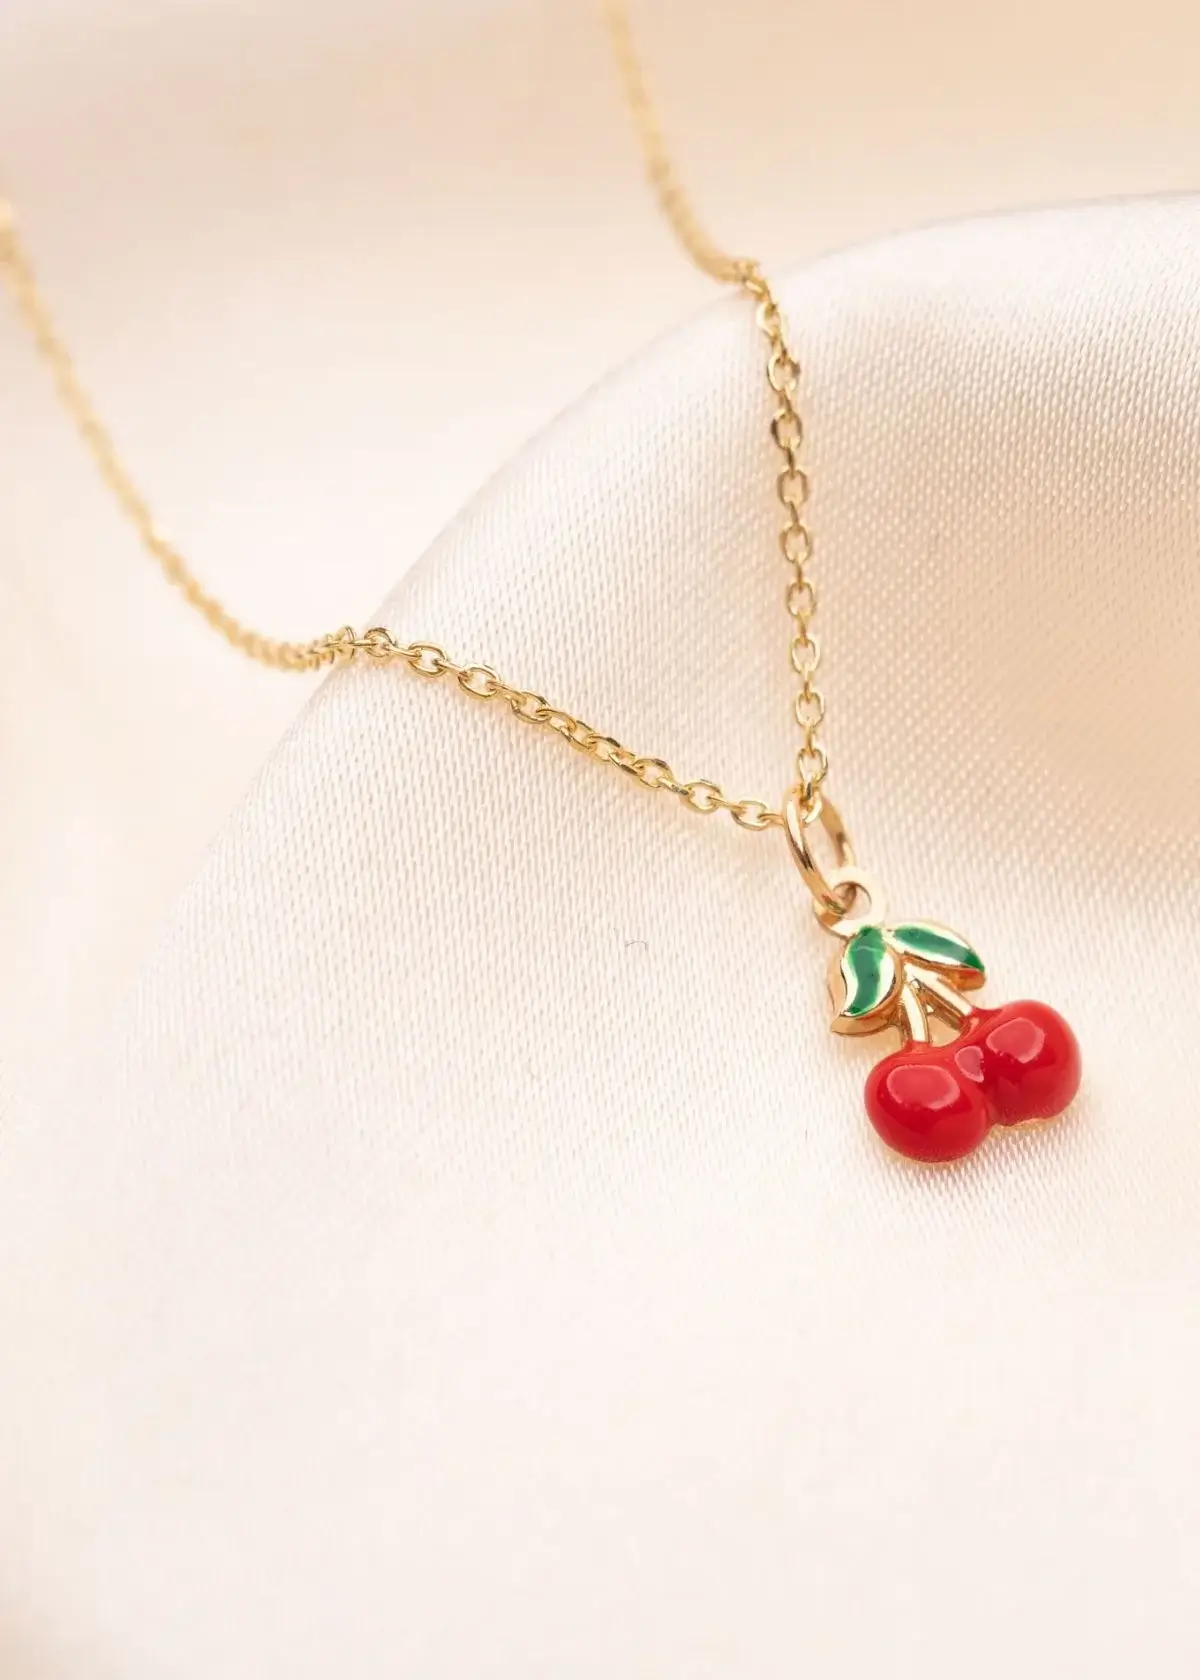 How to choose the right cherry necklace?